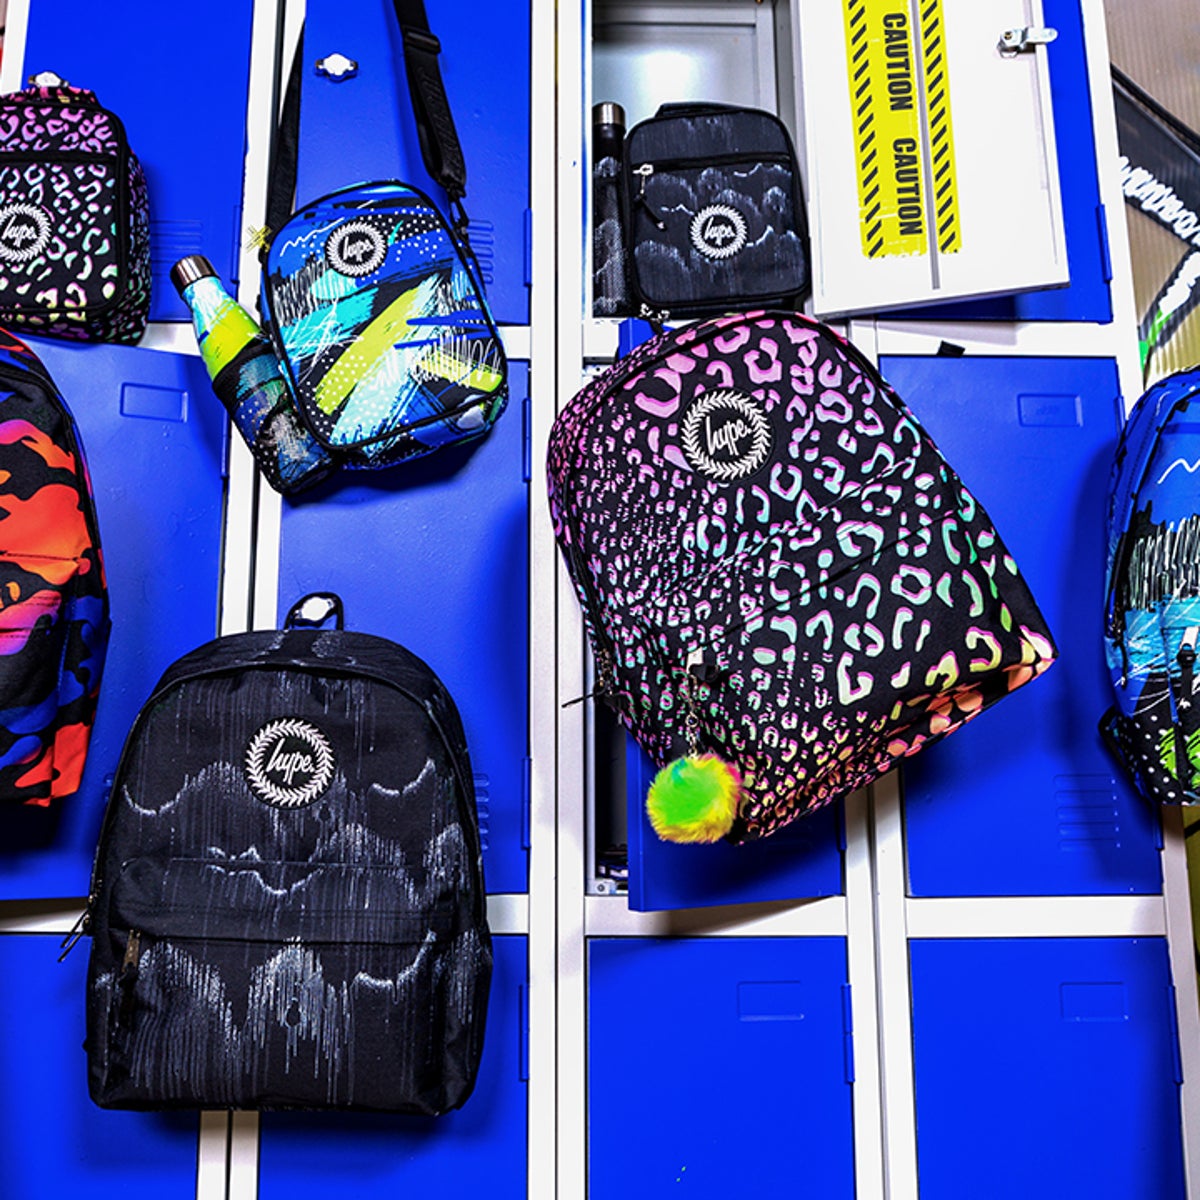 Believe the Hype, these are the back-to-school must-haves